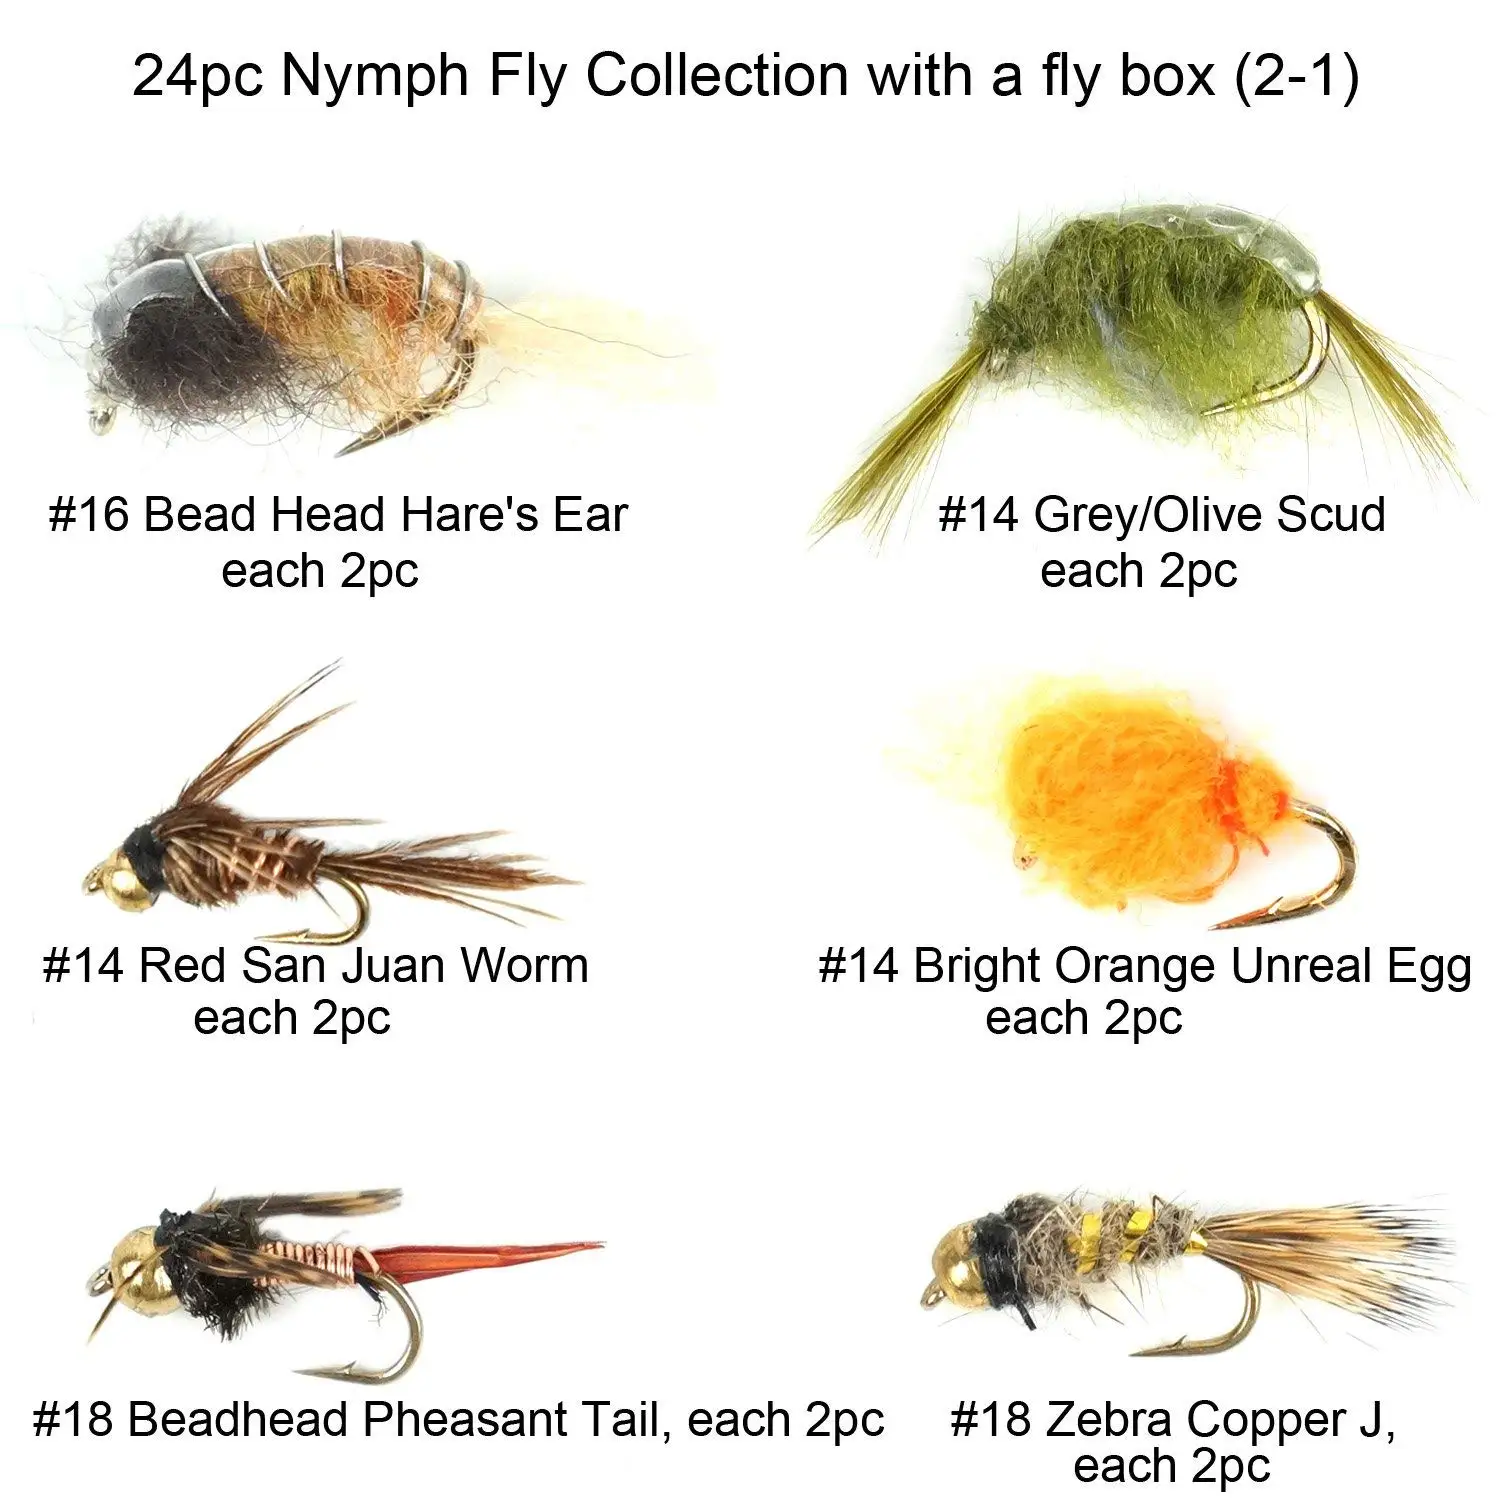 Mosquito Caenis Spinner Trout Flies with A Free Mini Box Olive dun Flying ant Aventik 1 Dozen of Same Fishing Flies Fly from11 Kinds May Flies Adams,Winged Olive Sparkle dun,Hendrickson 